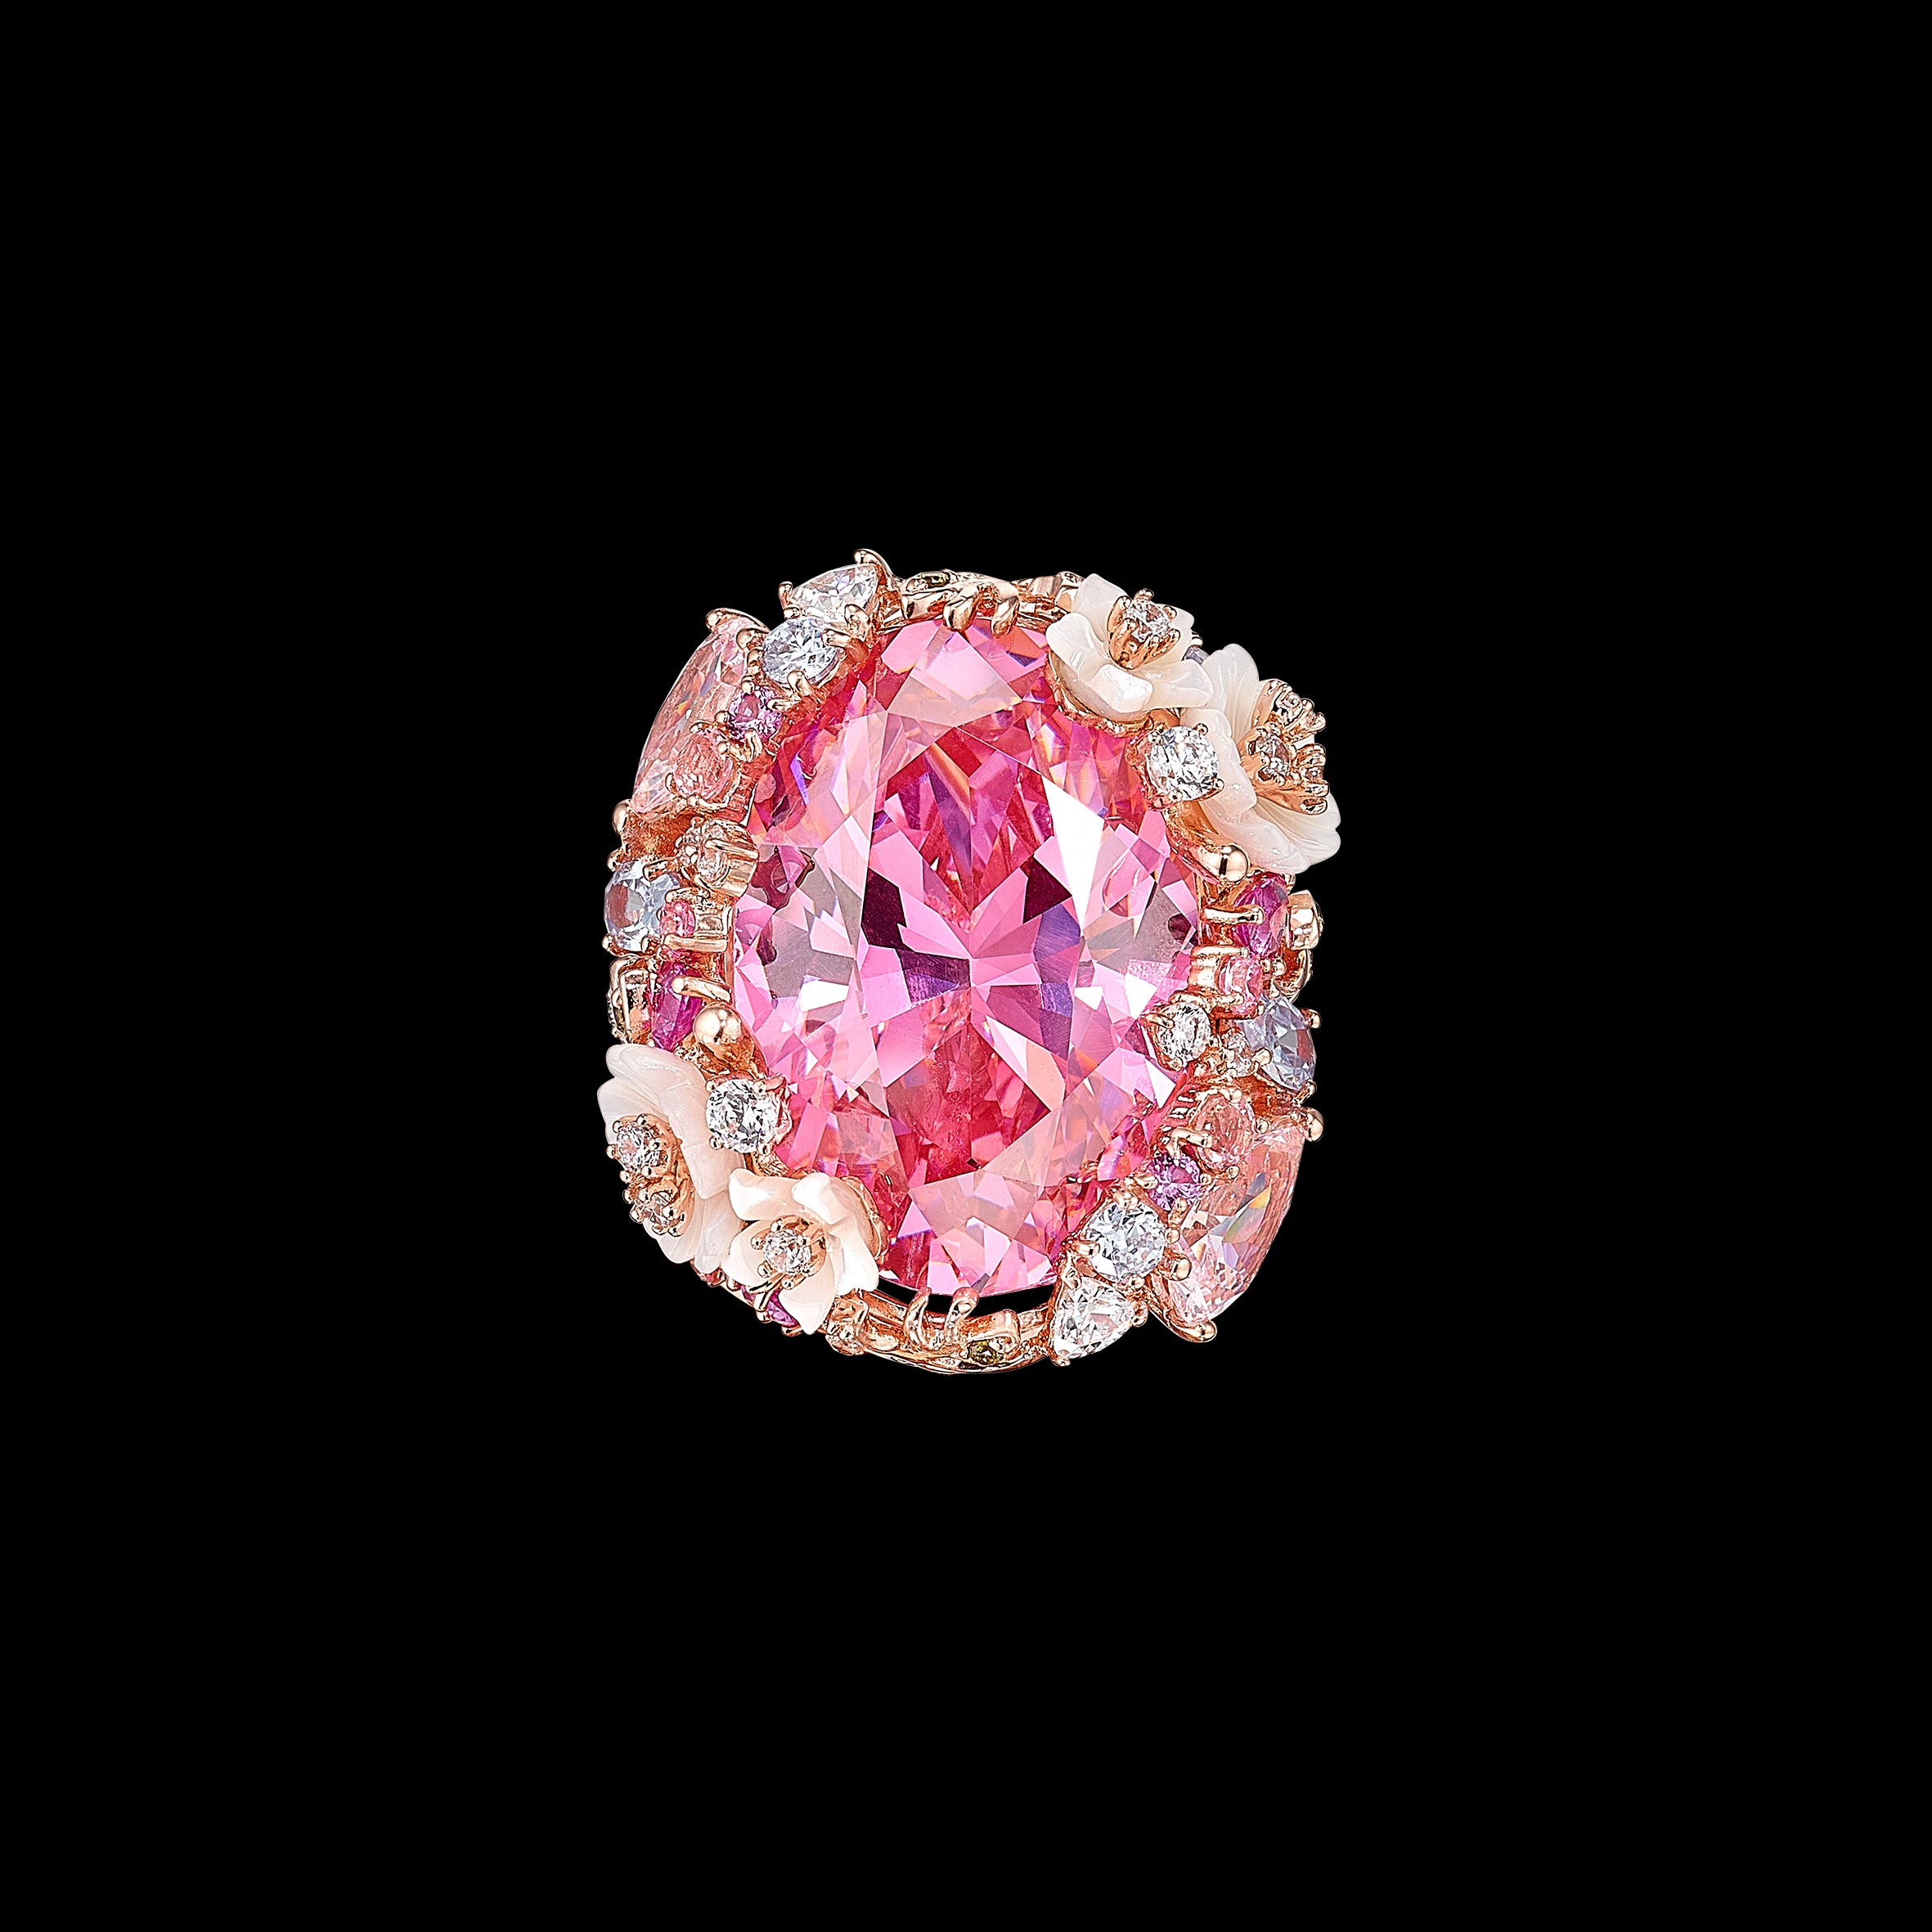 Pale Rose Paradise Ring, Ring, Anabela Chan Joaillerie - Fine jewelry with laboratory grown and created gemstones hand-crafted in the United Kingdom. Anabela Chan Joaillerie is the first fine jewellery brand in the world to champion laboratory-grown and created gemstones with high jewellery design, artisanal craftsmanship and a focus on ethical and sustainable innovations.